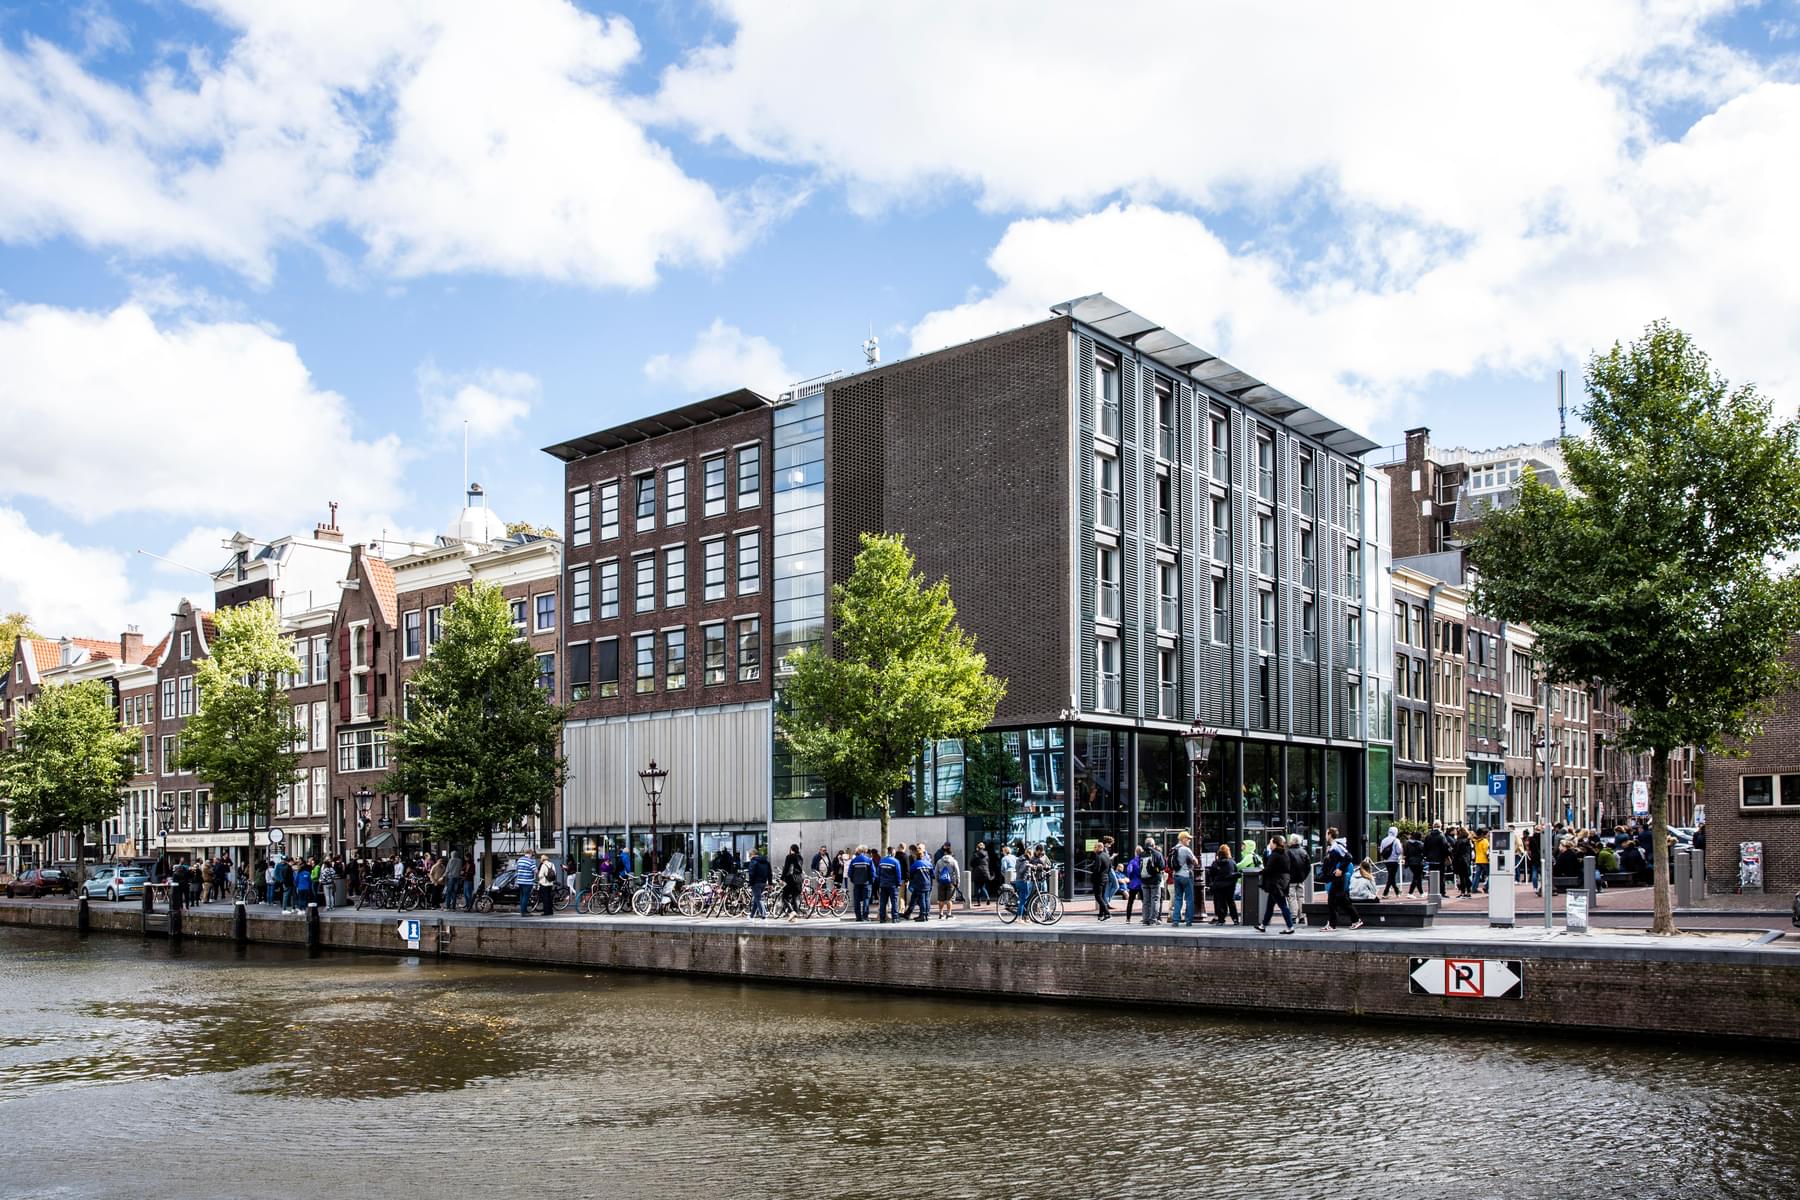 Anne Frank House: Her Untold Story of Courage And Resilience